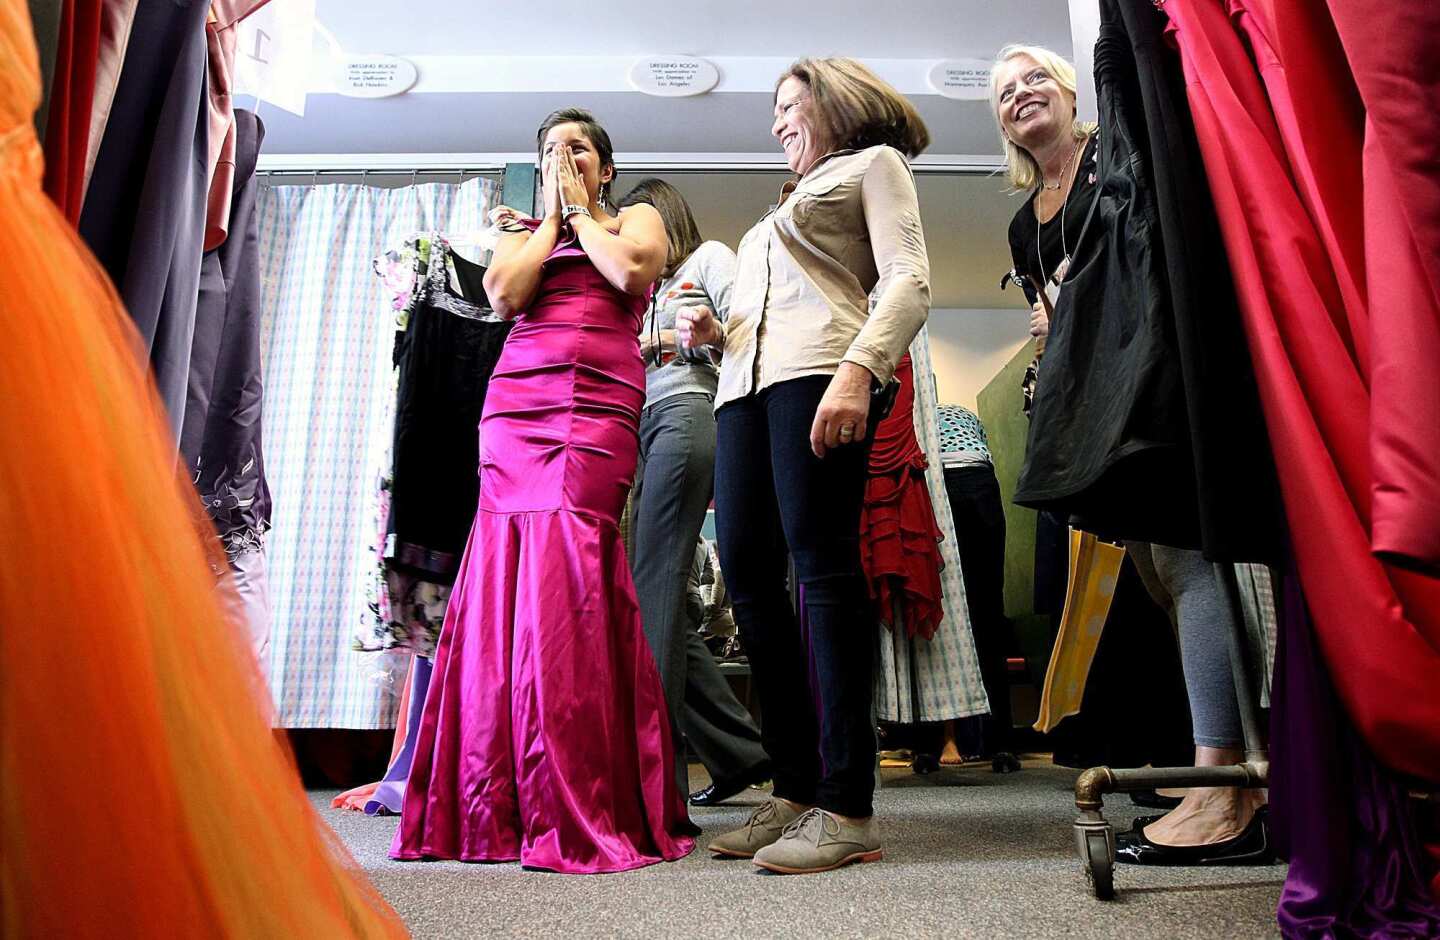 Ruby Diaz, 18, left, covers her face in excitement while trying on a prom gown with the help of Linda Levine, center, and Perri Kranzdorf, right, at Operation School Bell-Assistance League of Southern California headquarters in Hollywood. Diaz, a senior at Miguel Contreras Learning Complex in downtown Los Angeles, said, "When my dad recently lost his job, I wasn't thinking I was going to prom, so I'm very thankful for this program....It makes me feel wonderful."